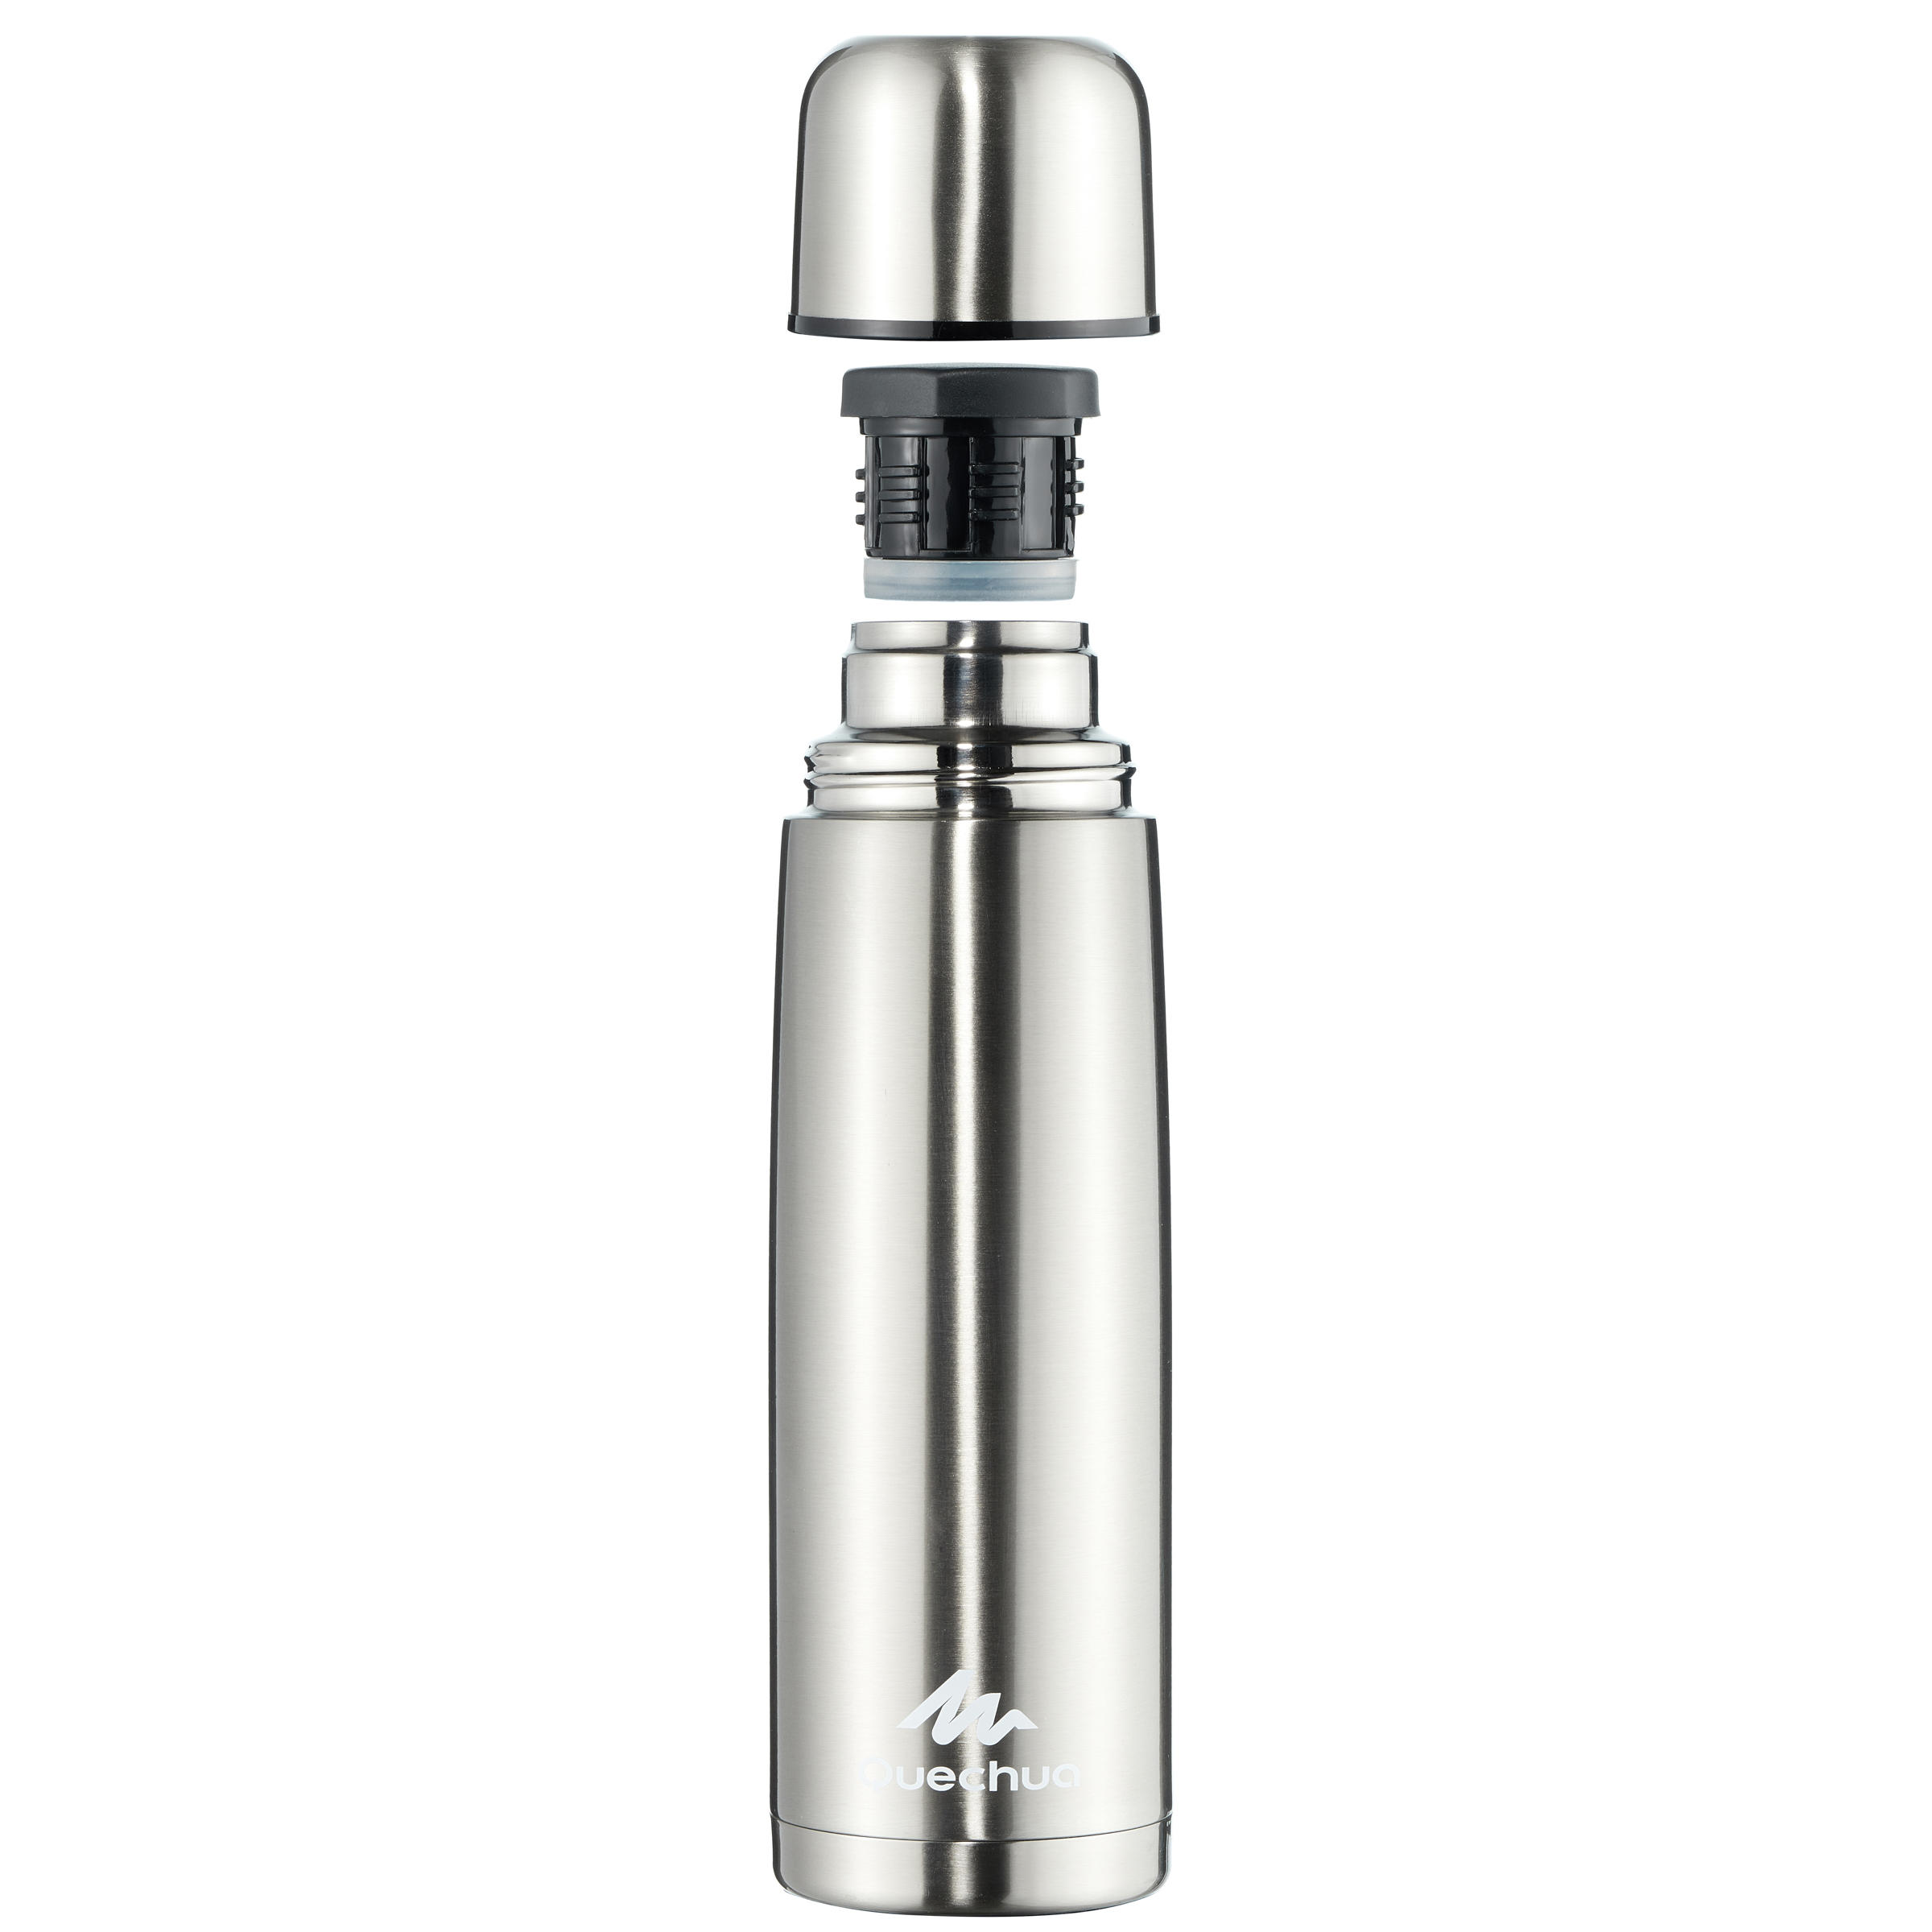 1 L stainless steel isothermal water bottle with cup for hiking - Silver 4/11